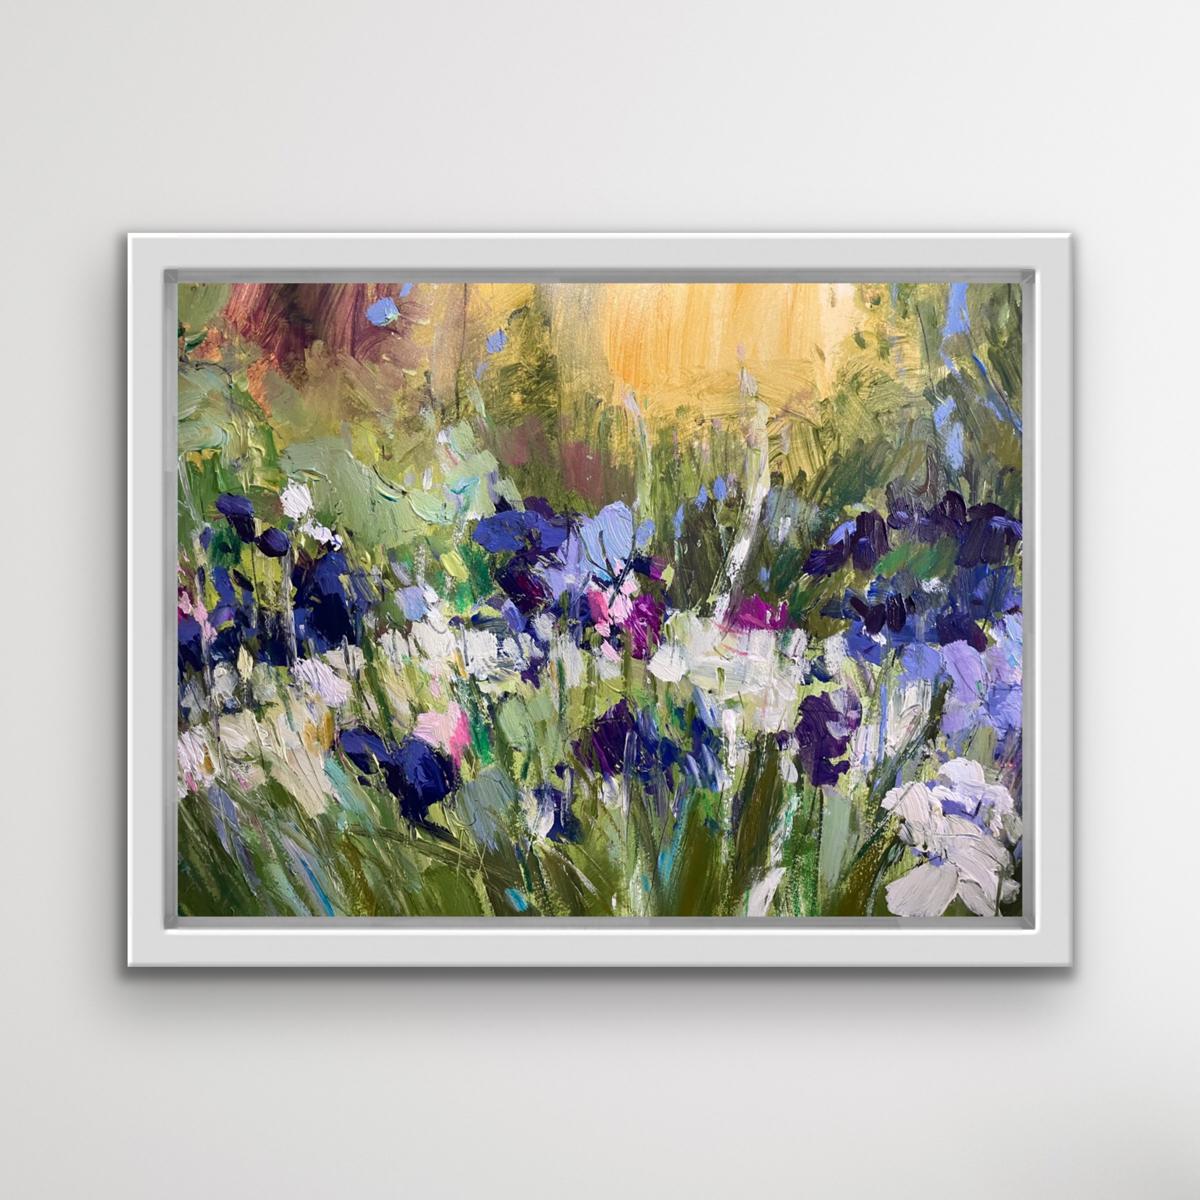 Summer evening in the garden with irises. Framed dimensions - 75cm x 55cm. Non-reflective glass. Framed in hand-painted off white Farrow and Ball frame. Mixed media. Inspired by a friend’s garden a recent summer evening when the sun was setting over